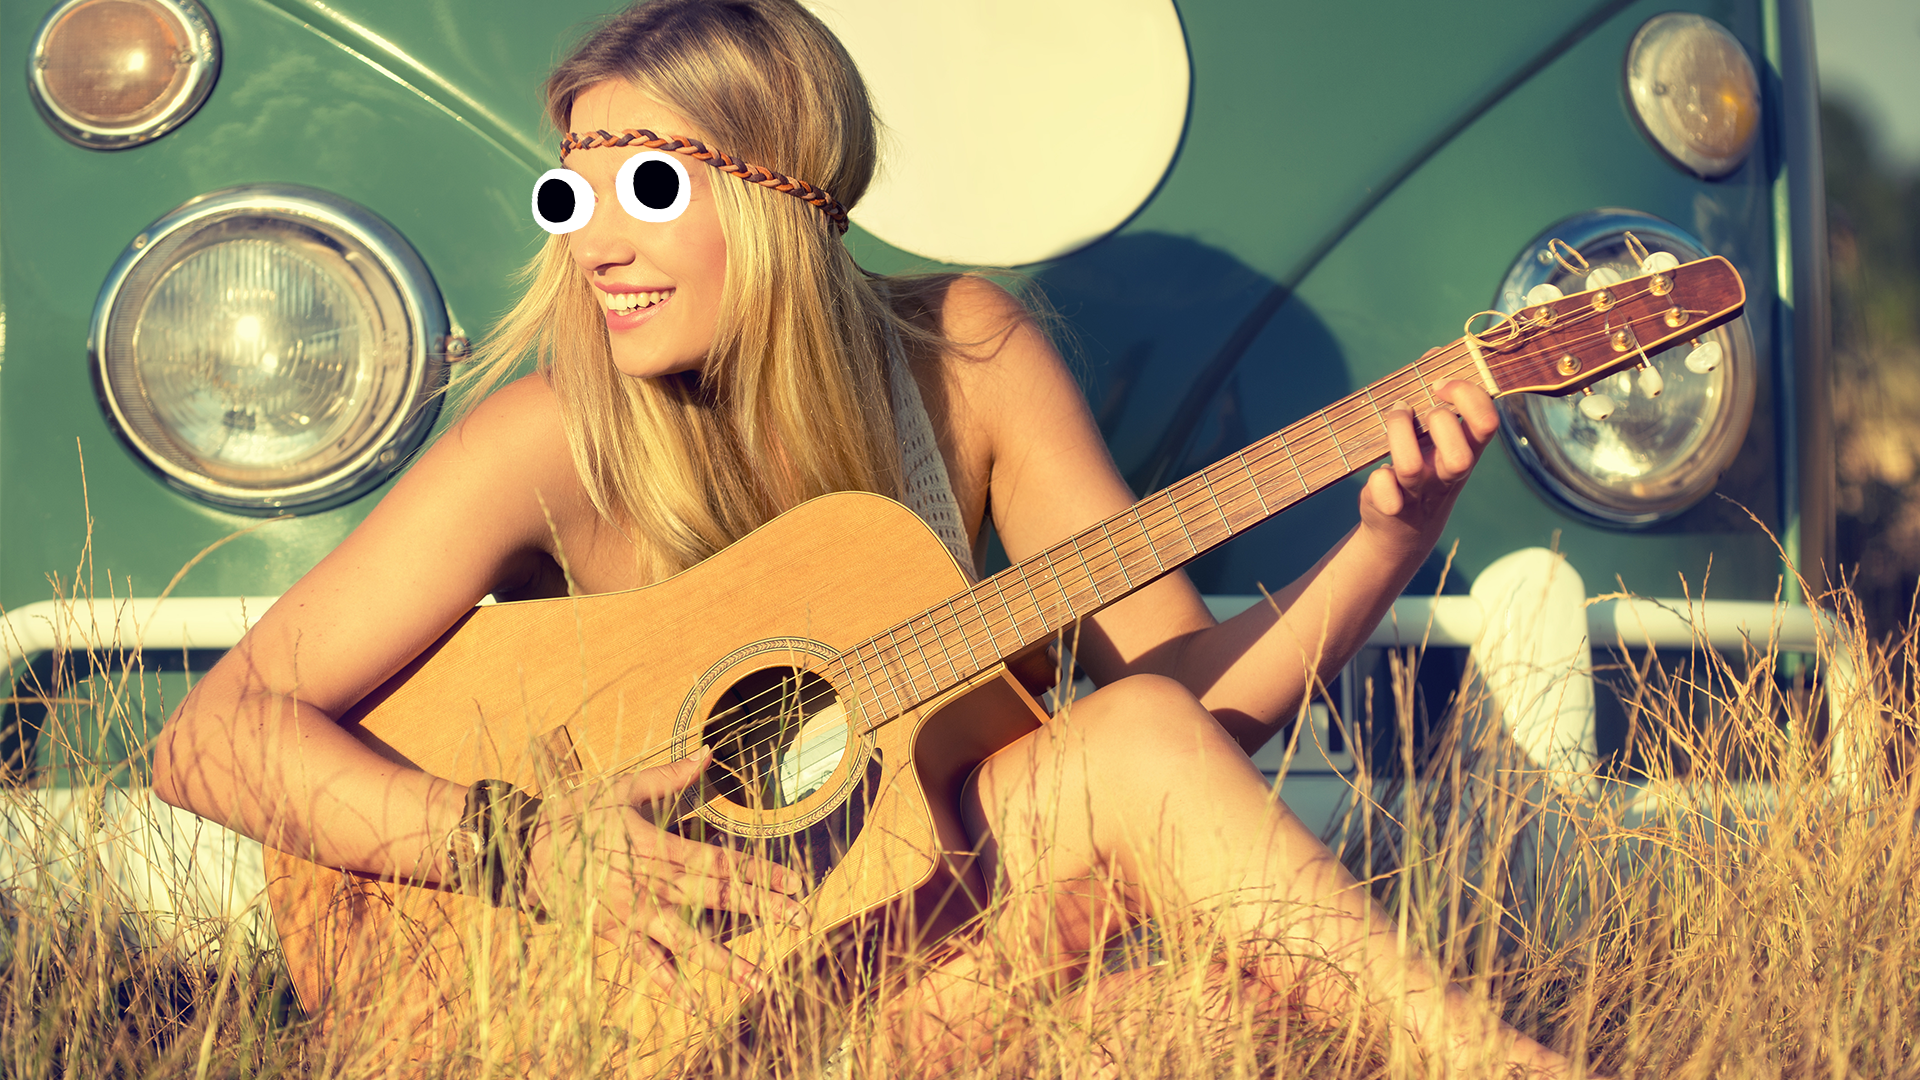 Girl playing guitar in a field